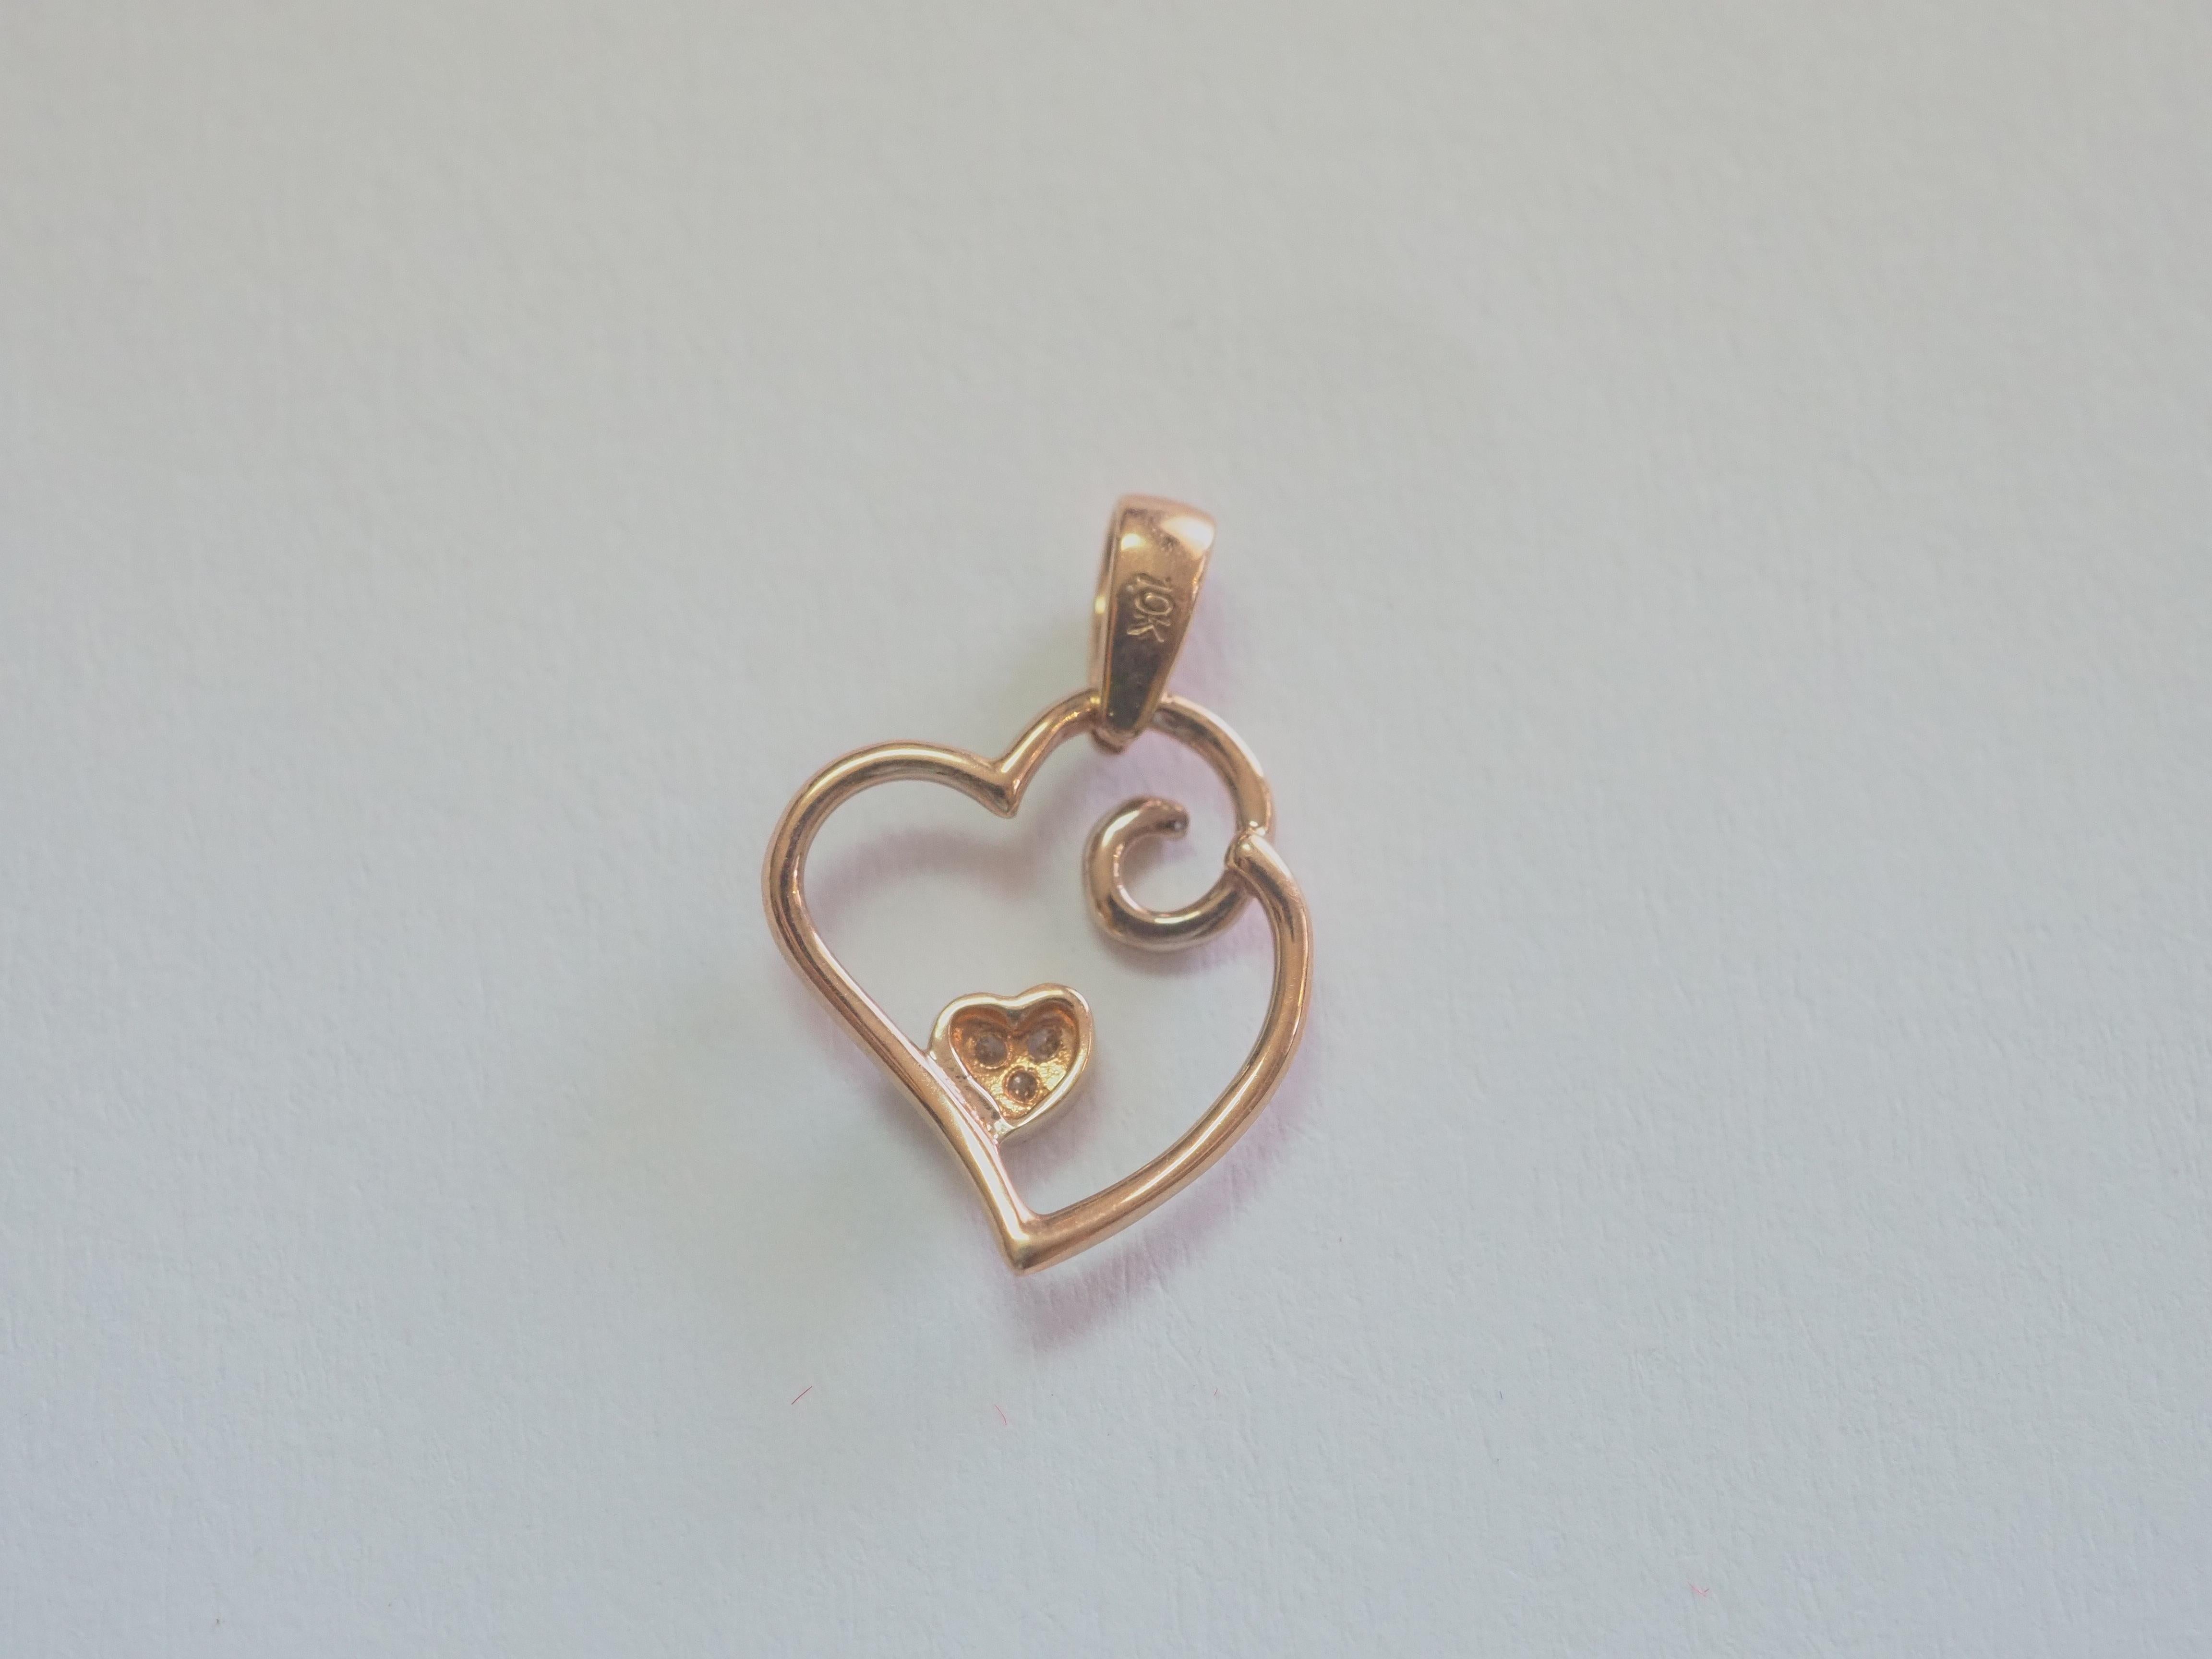 Round Cut No Reserve- 10K Rose Gold Diamond Abstract Heart Motif Pendant For Sale